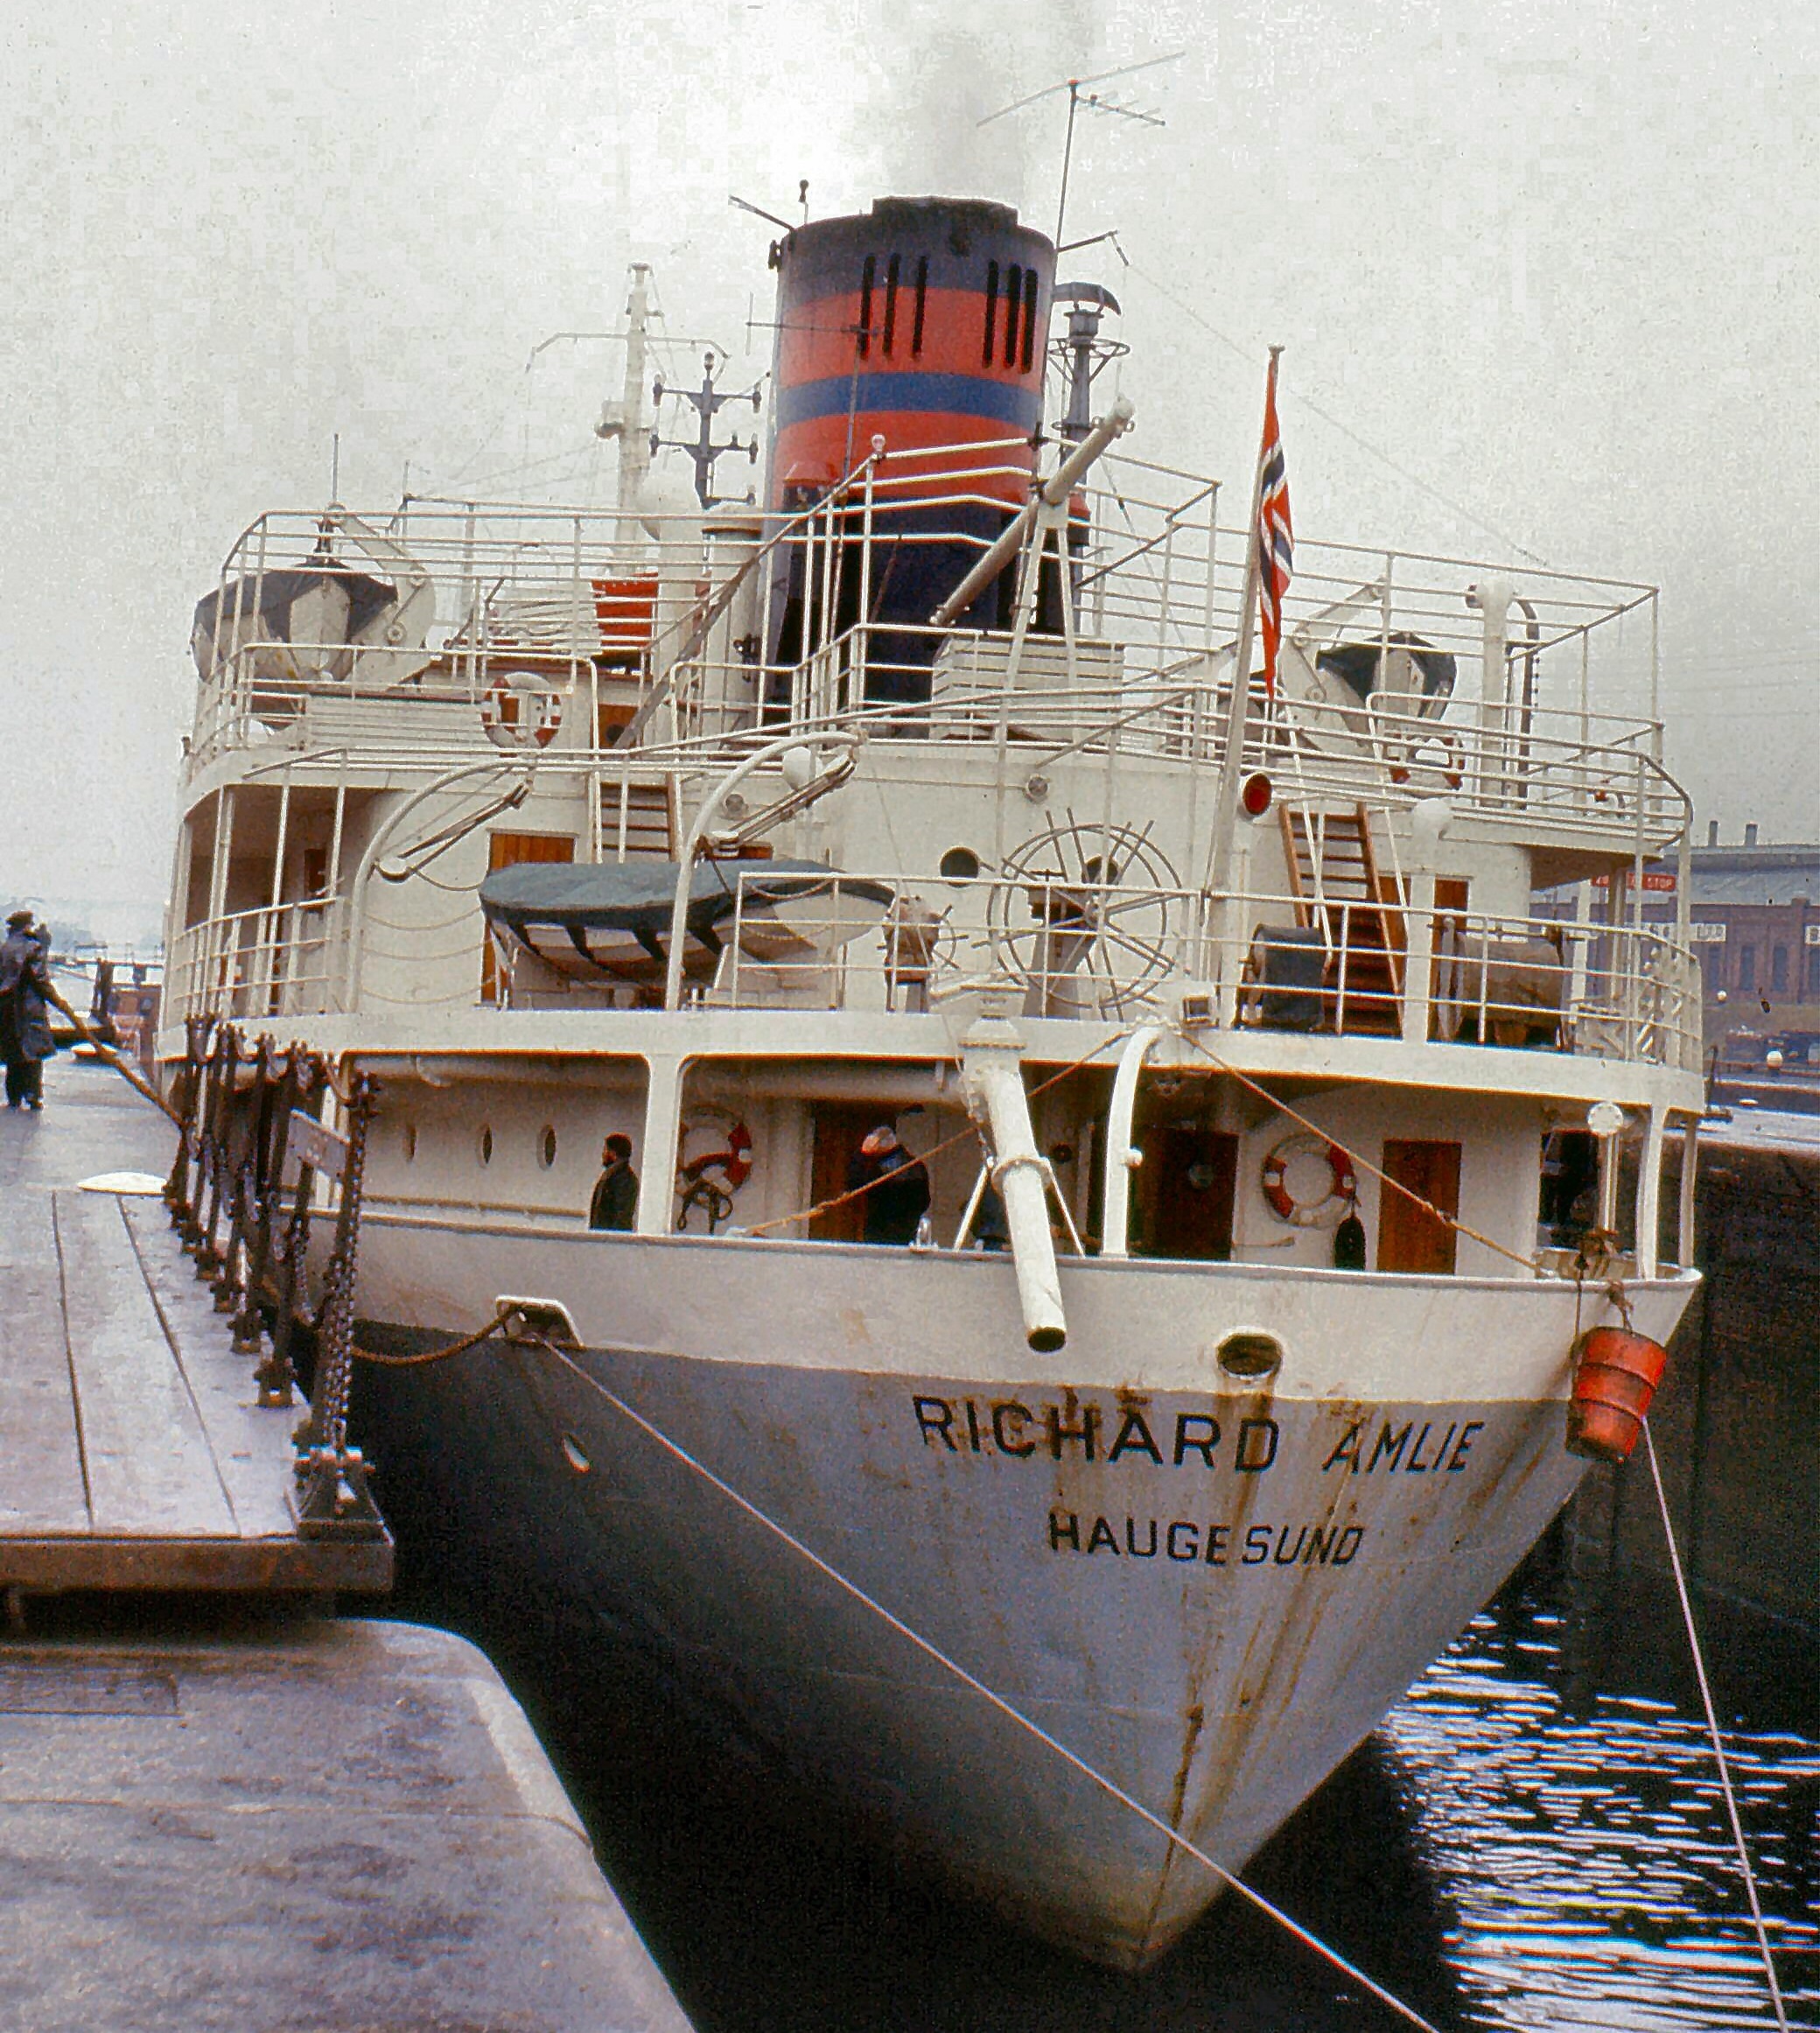 A Norwegian boat docked in the town in the sixties (Image: Eddie Whitham)